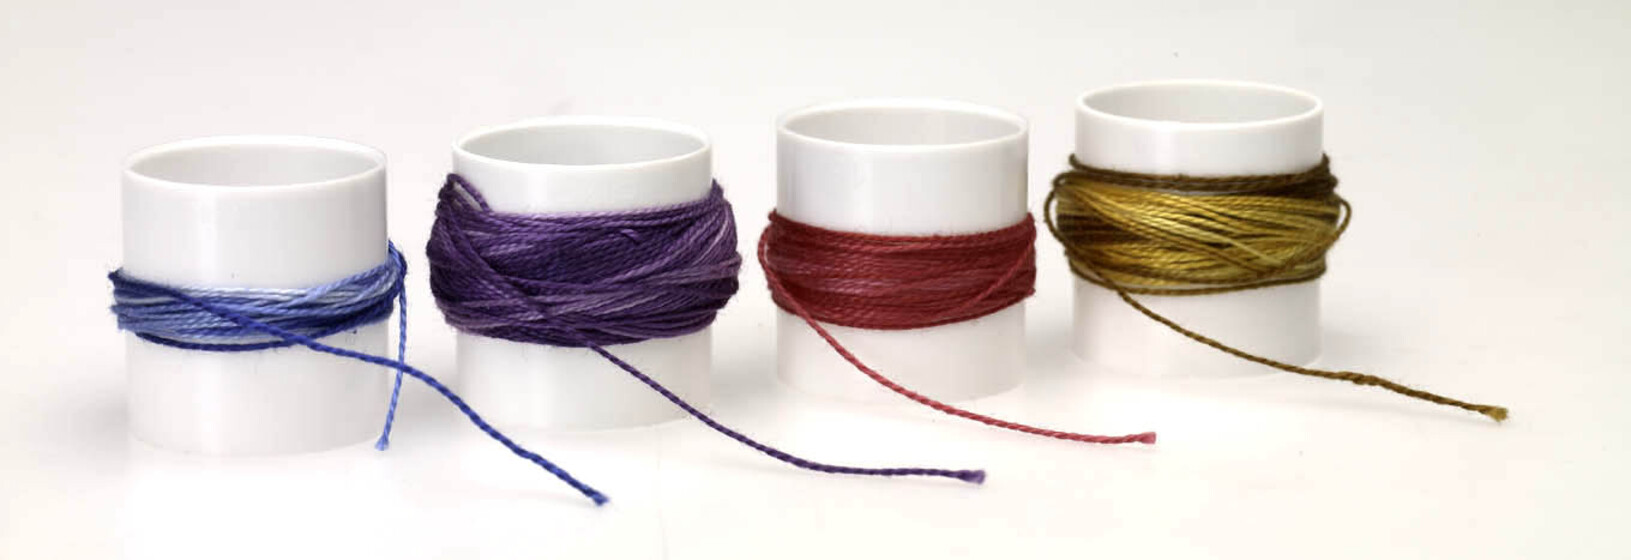 Four acrylic small cylinders, each holding a different coloured thread wrapped around of blue, purple, red and yellow.